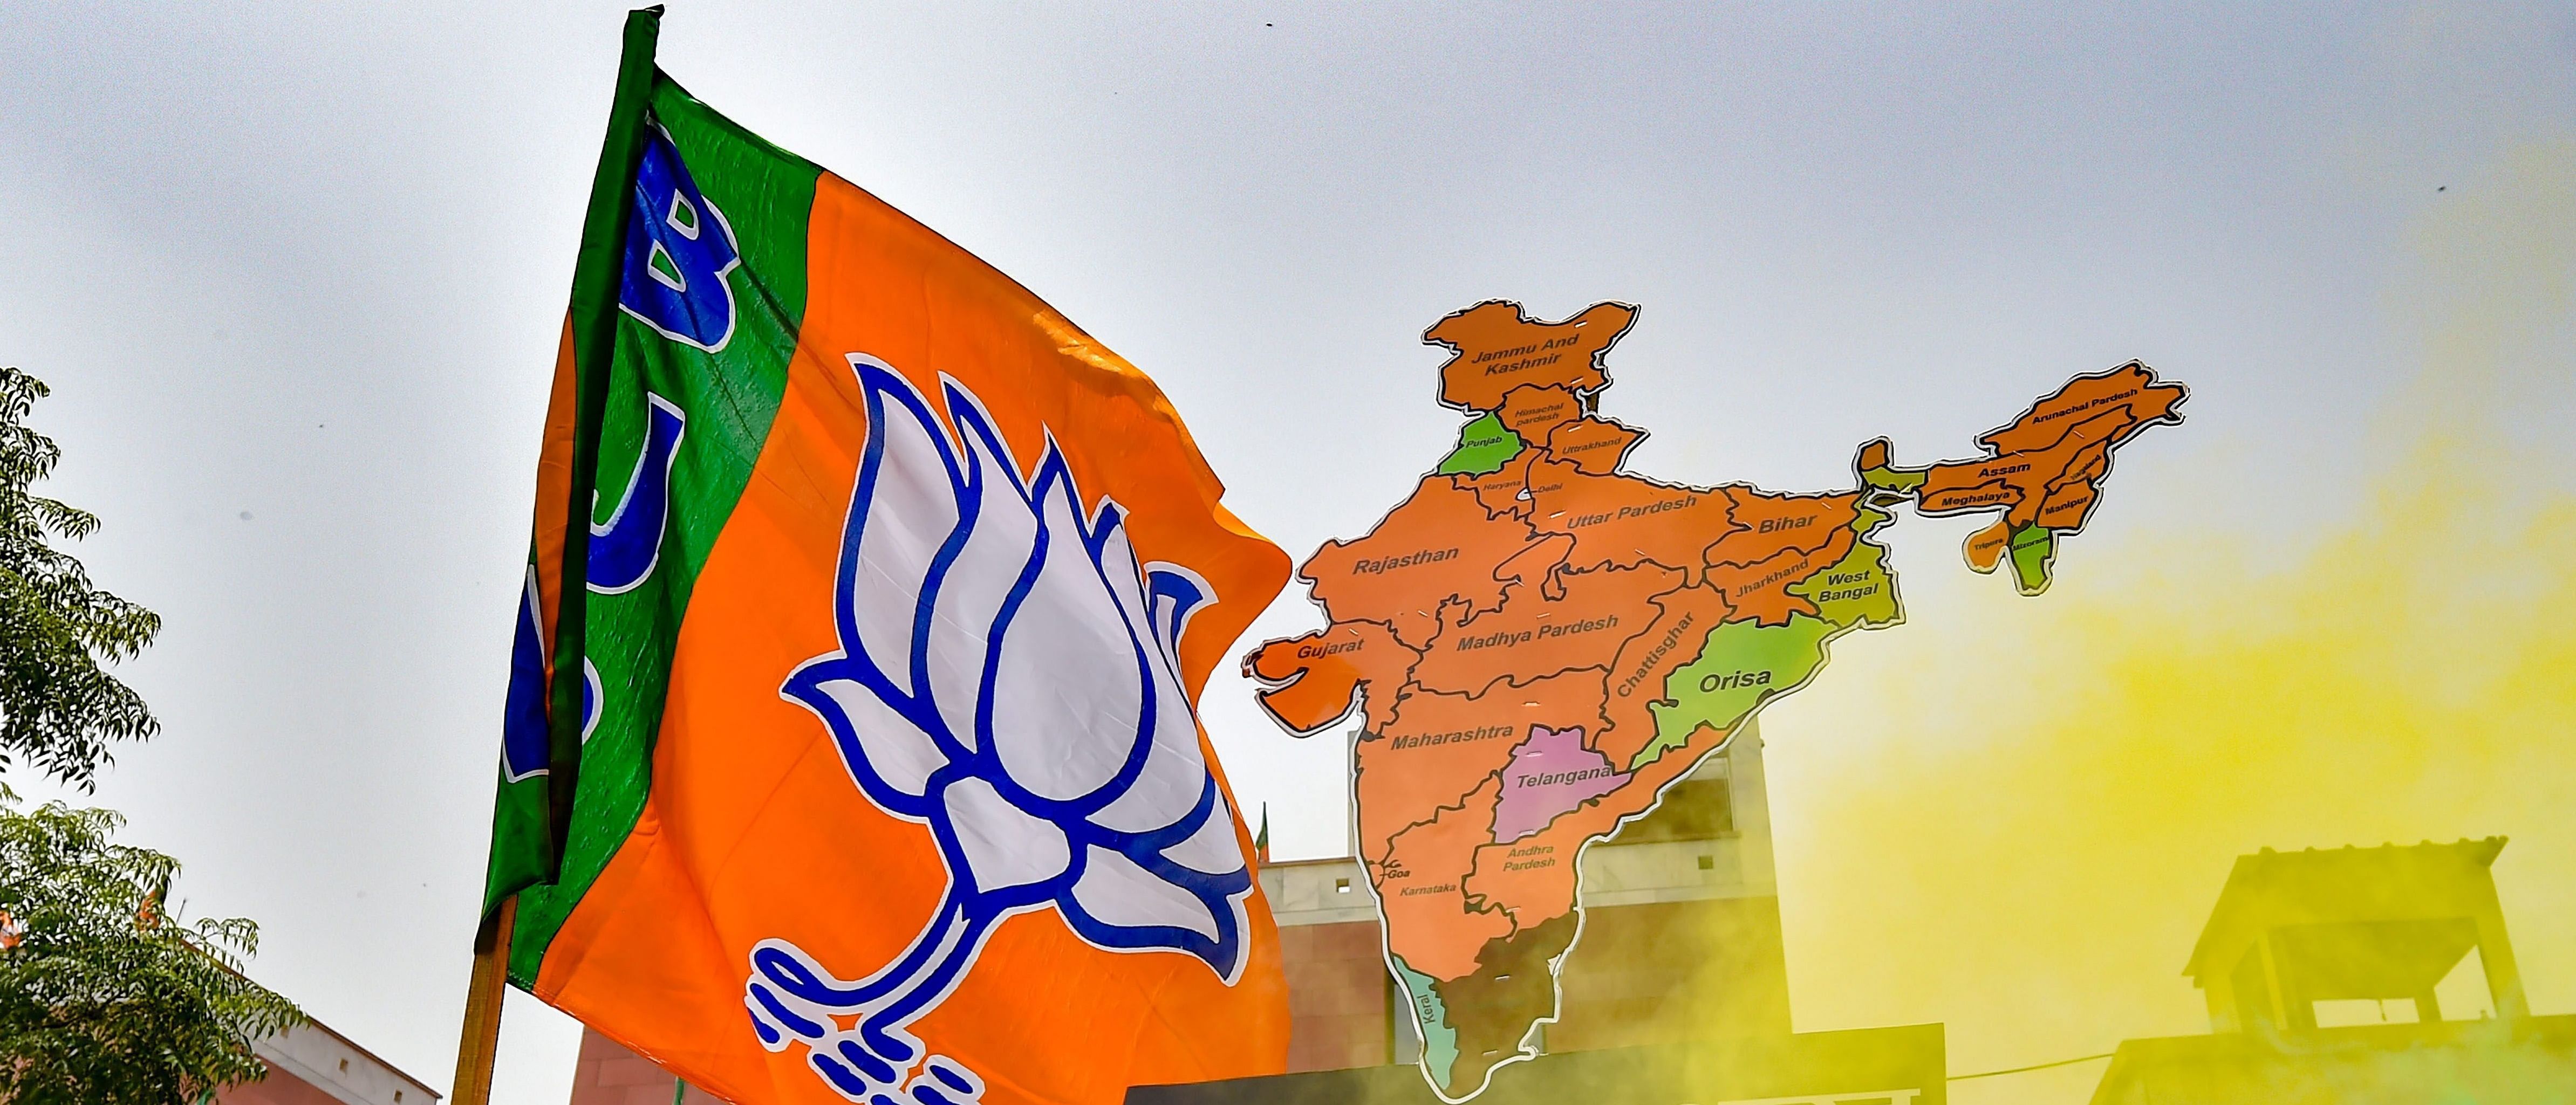 BJP is in power because only one Congress can rule India at a time